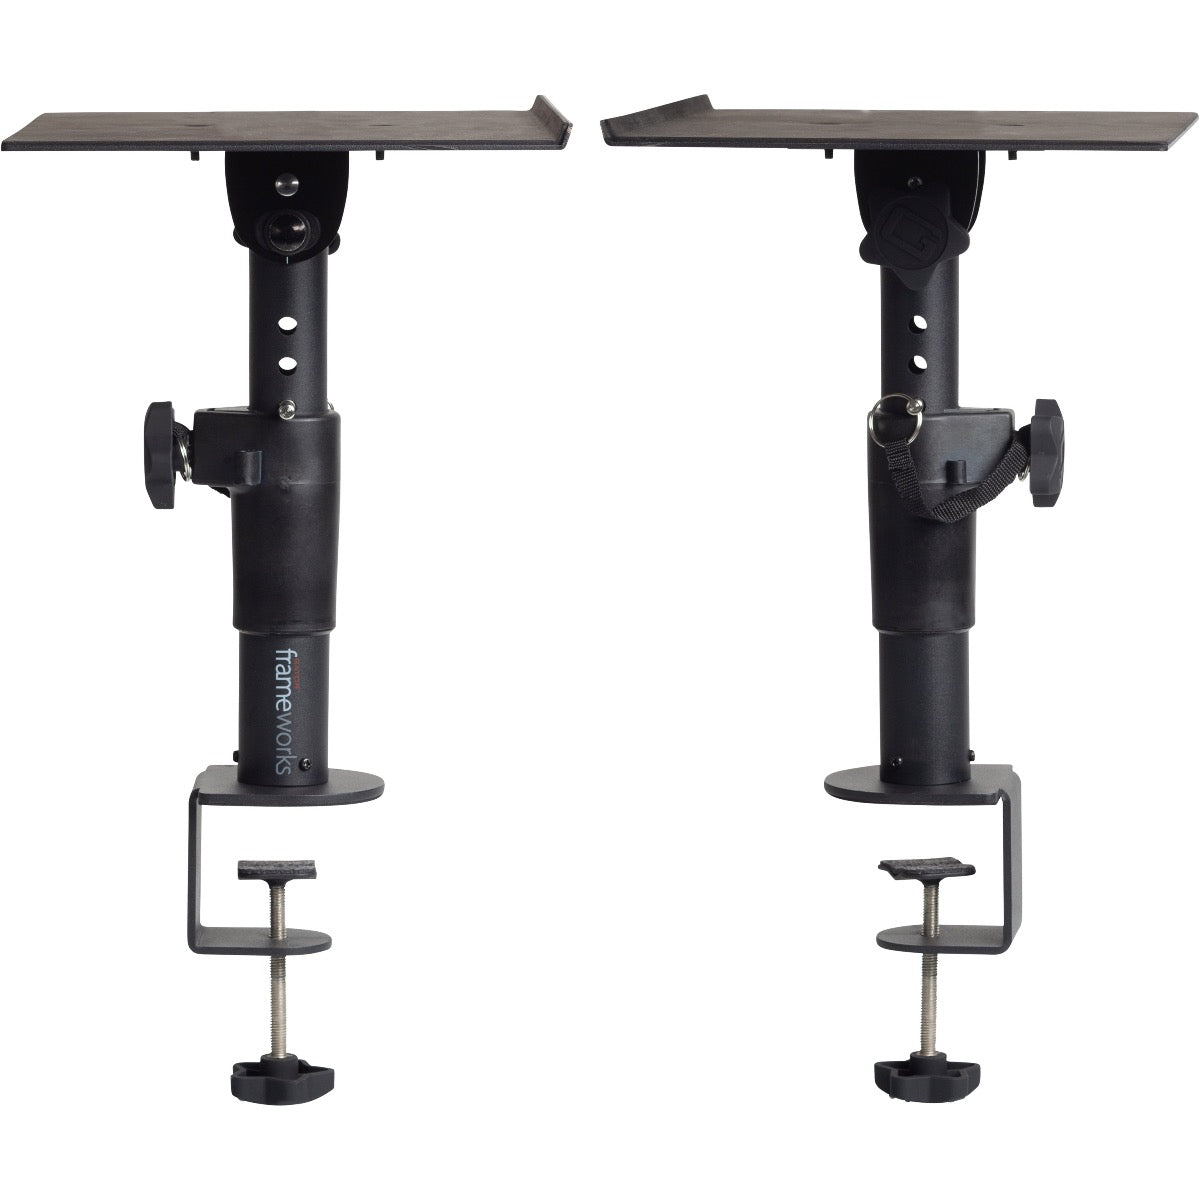 Profile view of pair of Gator Frameworks GFWSPKSTMNDSKCMP Clamp-On Studio Monitor Stands facing each other with height adjusted at medium